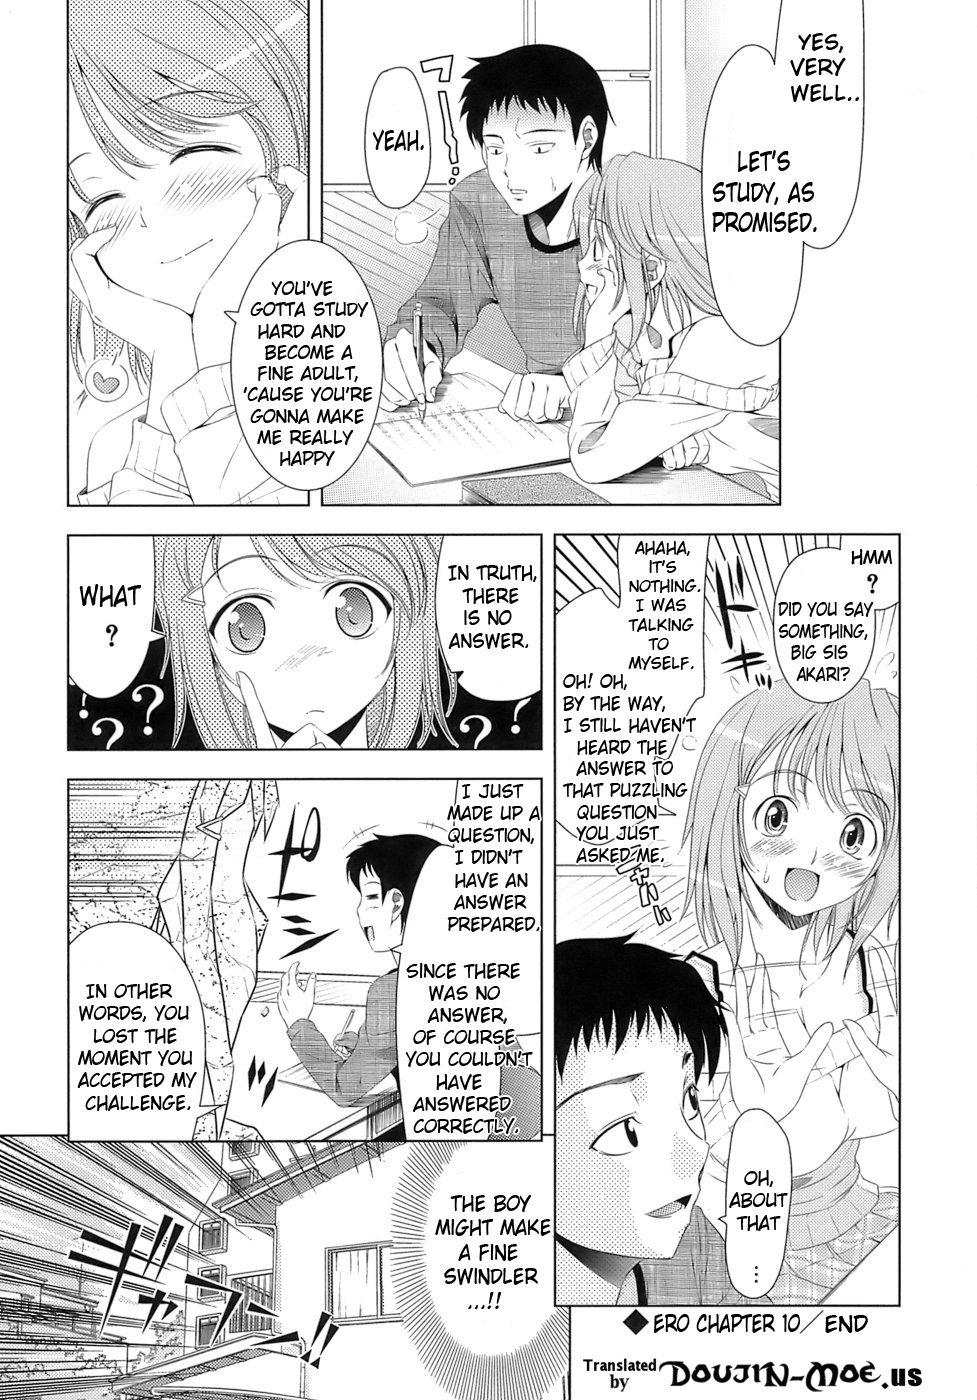 Man Let's Do Love Like the Ero-Manga Ch. 10 Rough Sex - Page 16